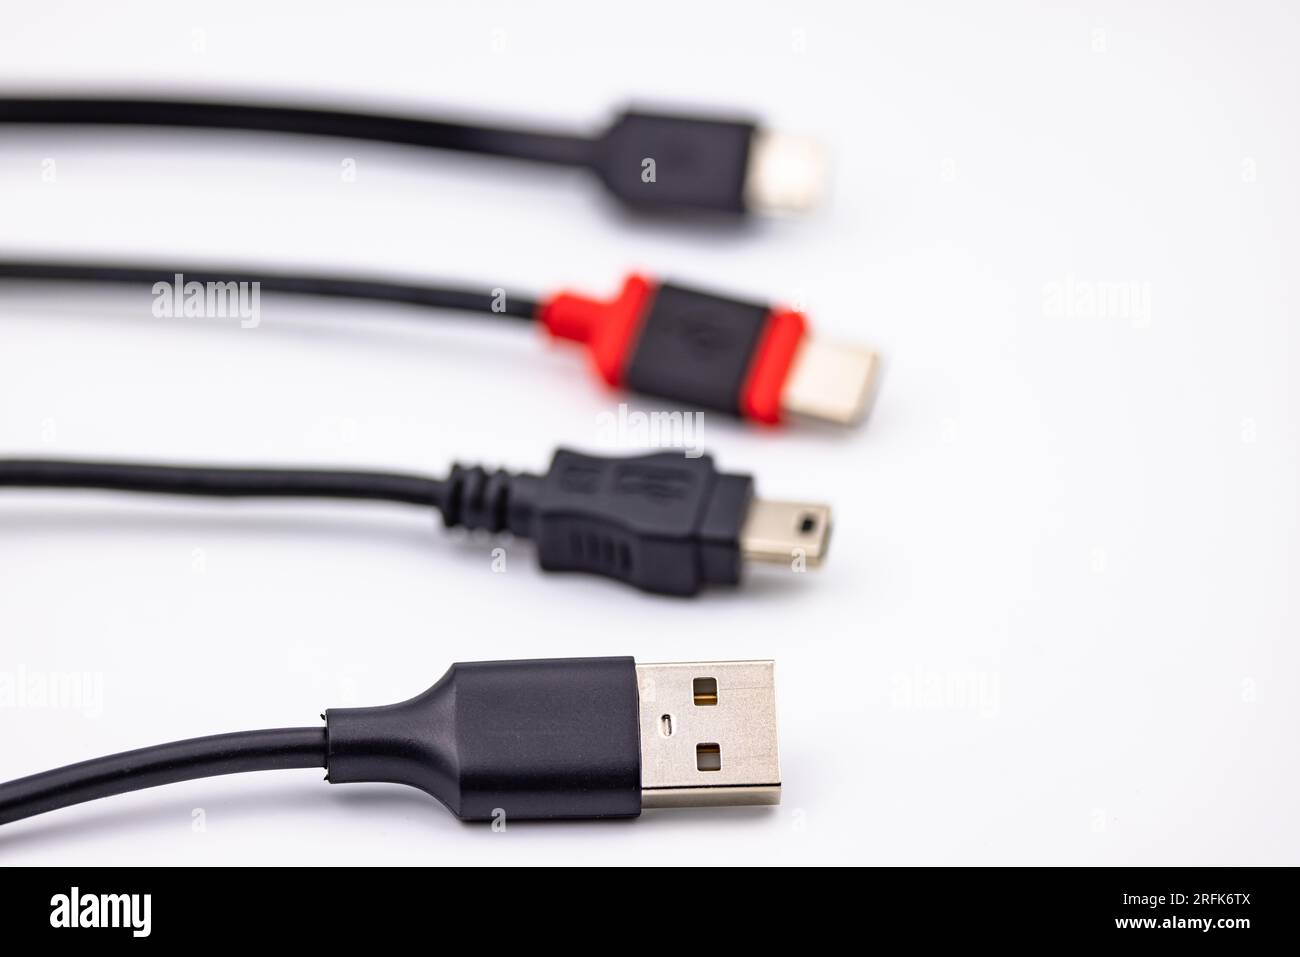 Mini USB connector and cable alongside other USB type adapters isolated in studio against white background Stock Photo